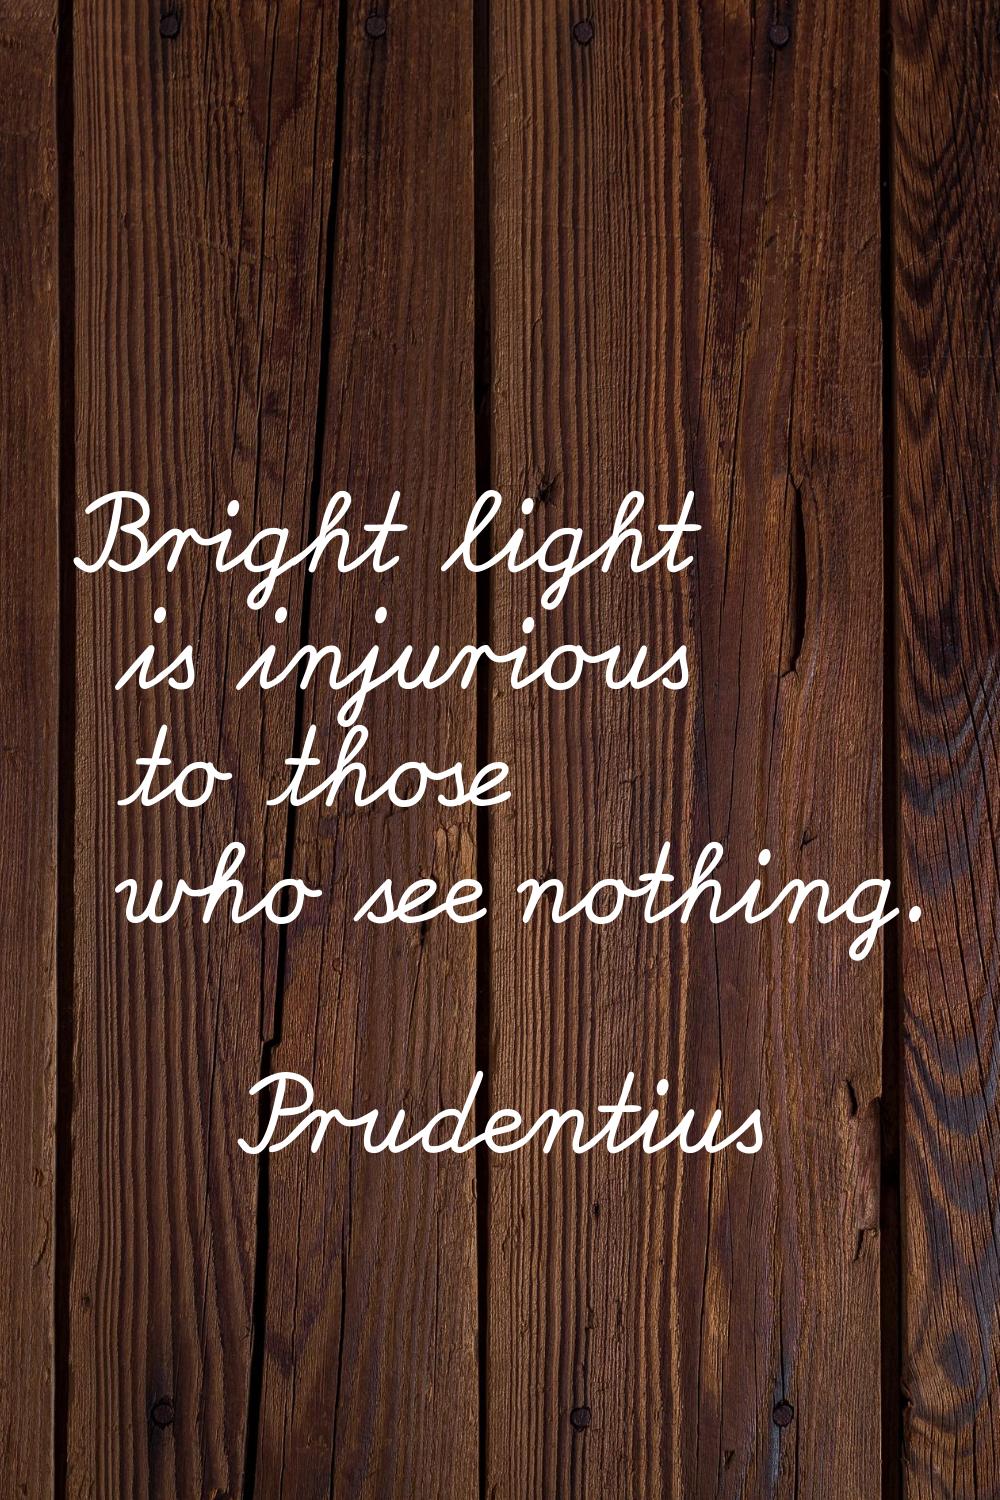 Bright light is injurious to those who see nothing.